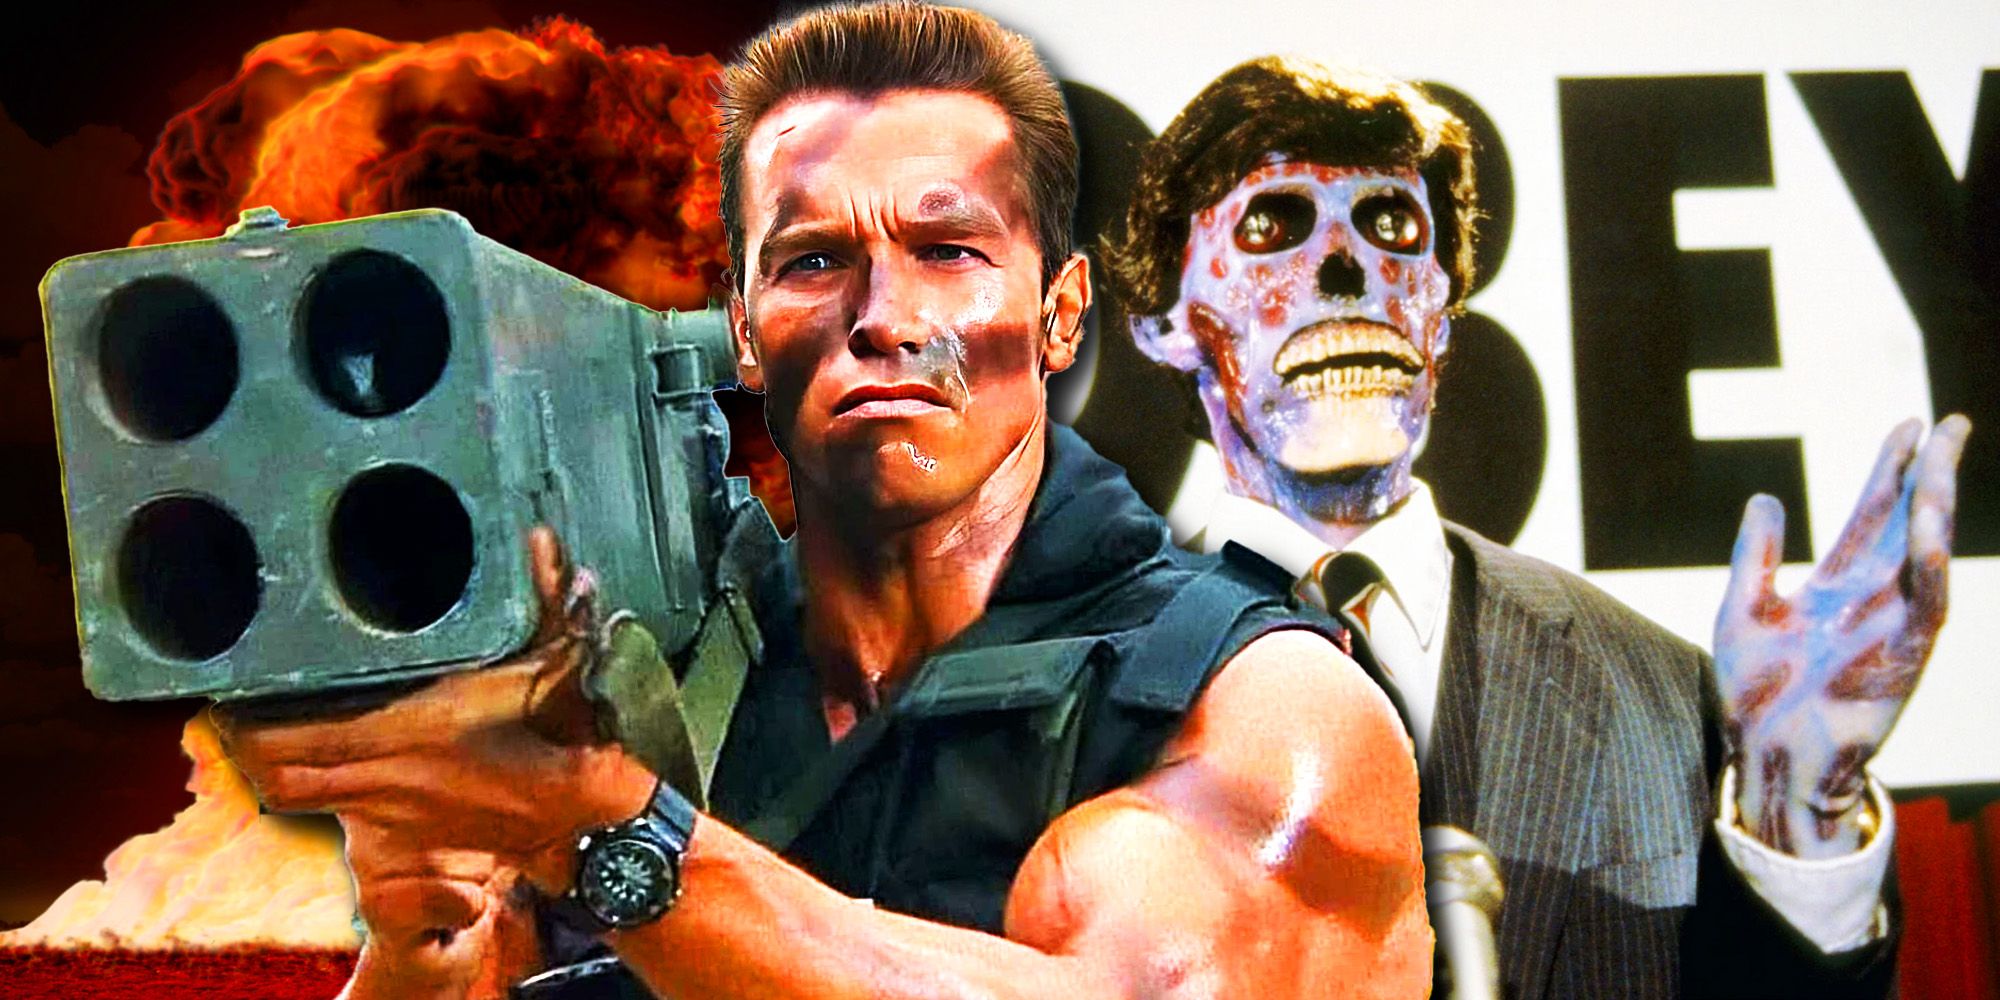 Arnold Schwarzenegger in Commando and an alien from They Live